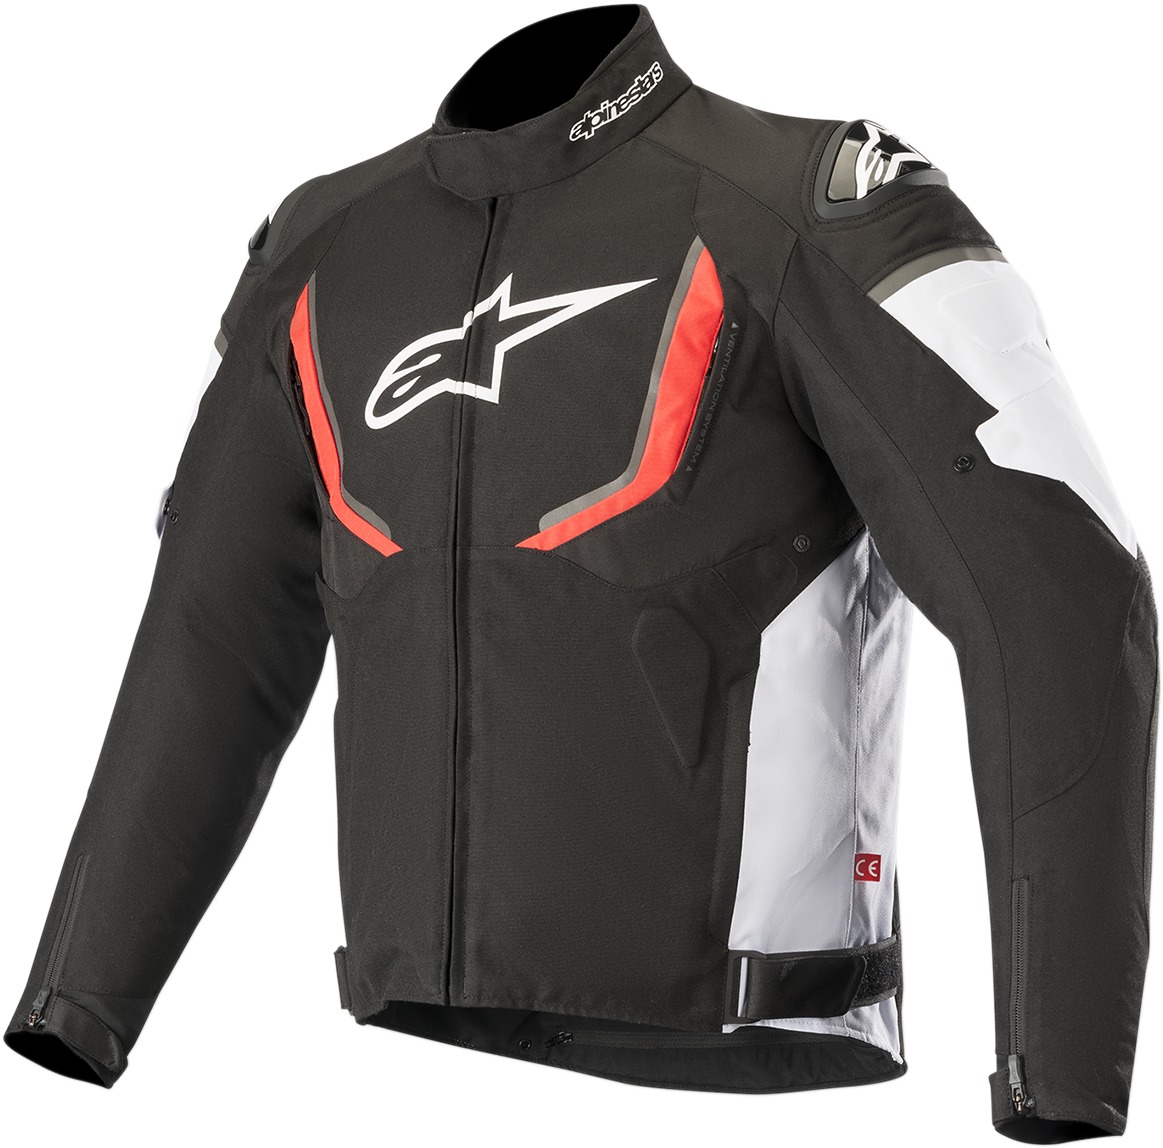 T-GPR V2 Street Riding Jacket Black/Red/White US X-Large - Click Image to Close